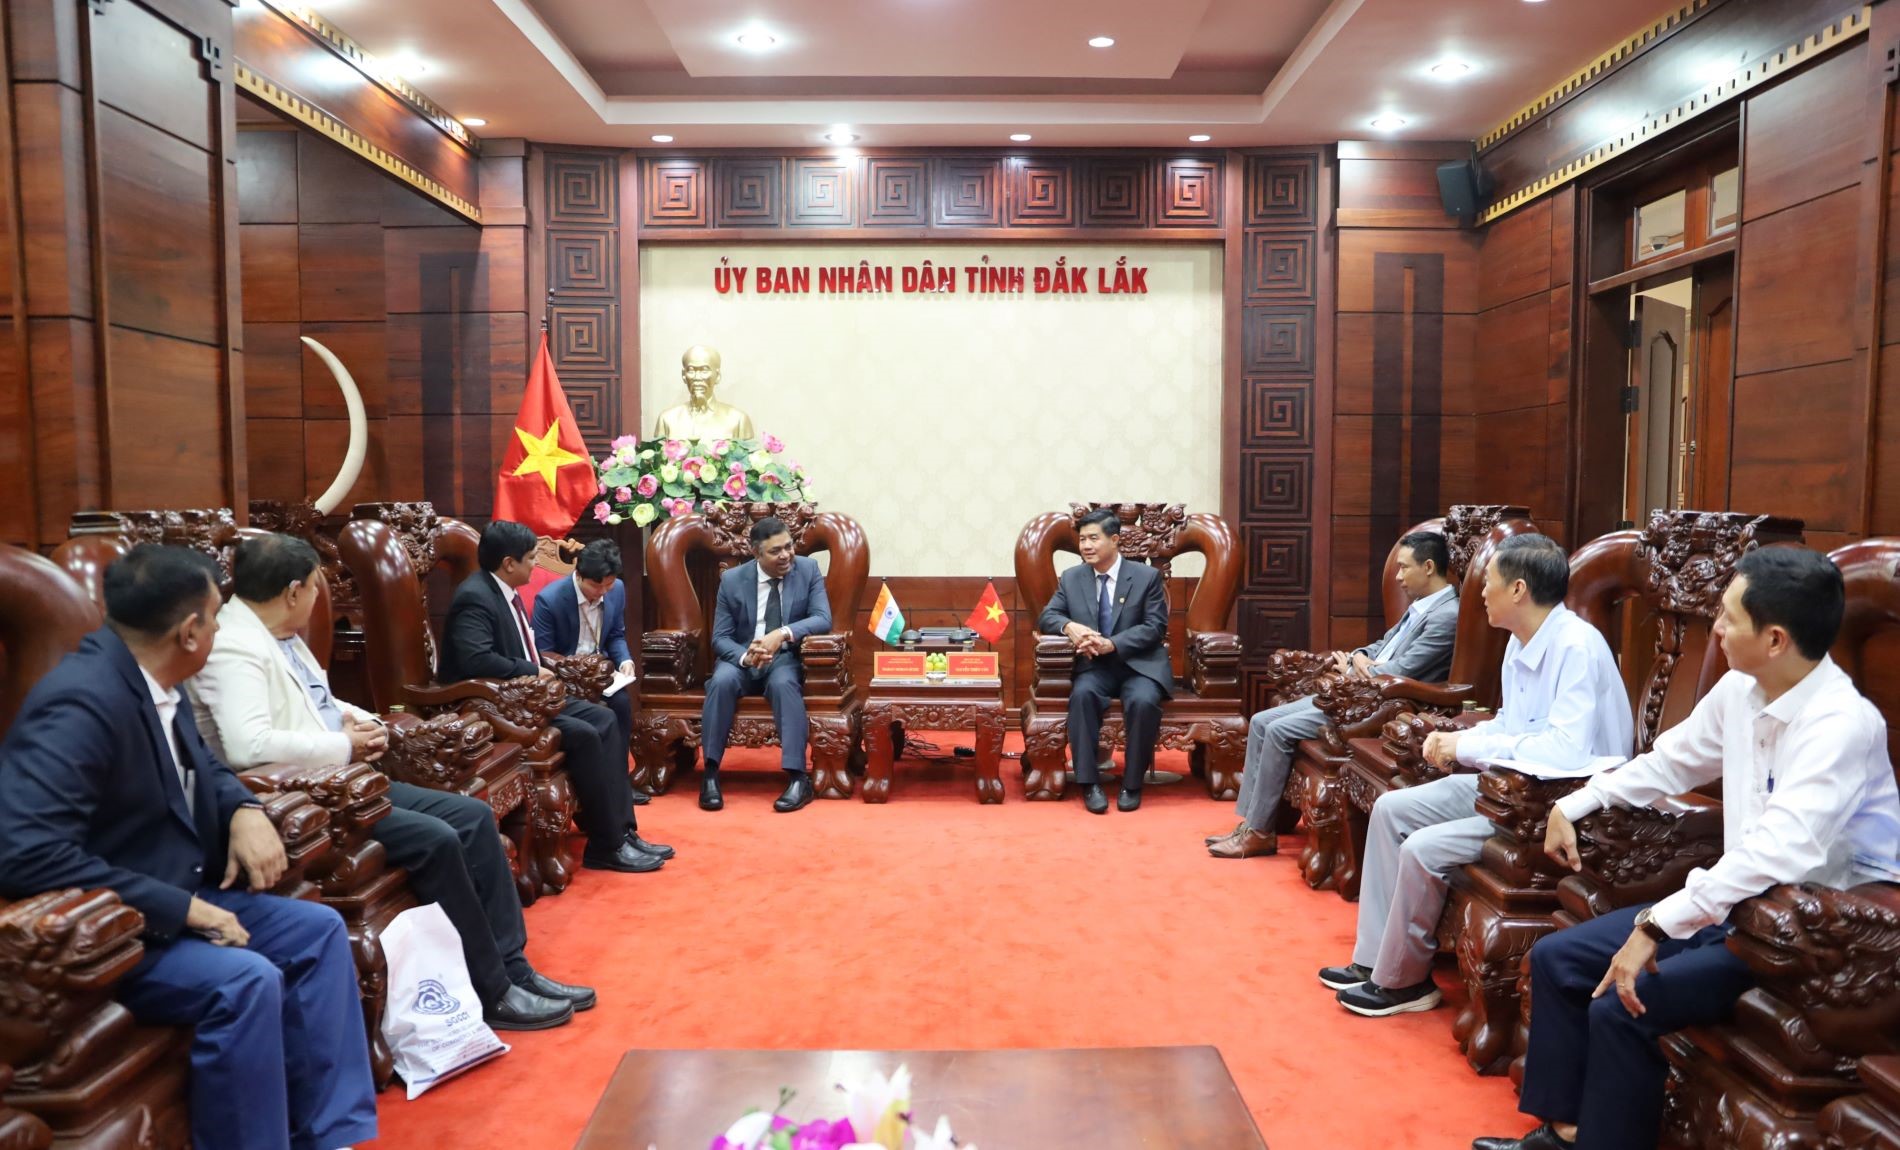 The People's Committee of Dak Lak Province receives the delegation from the Consulate General of India in Ho Chi Minh City.